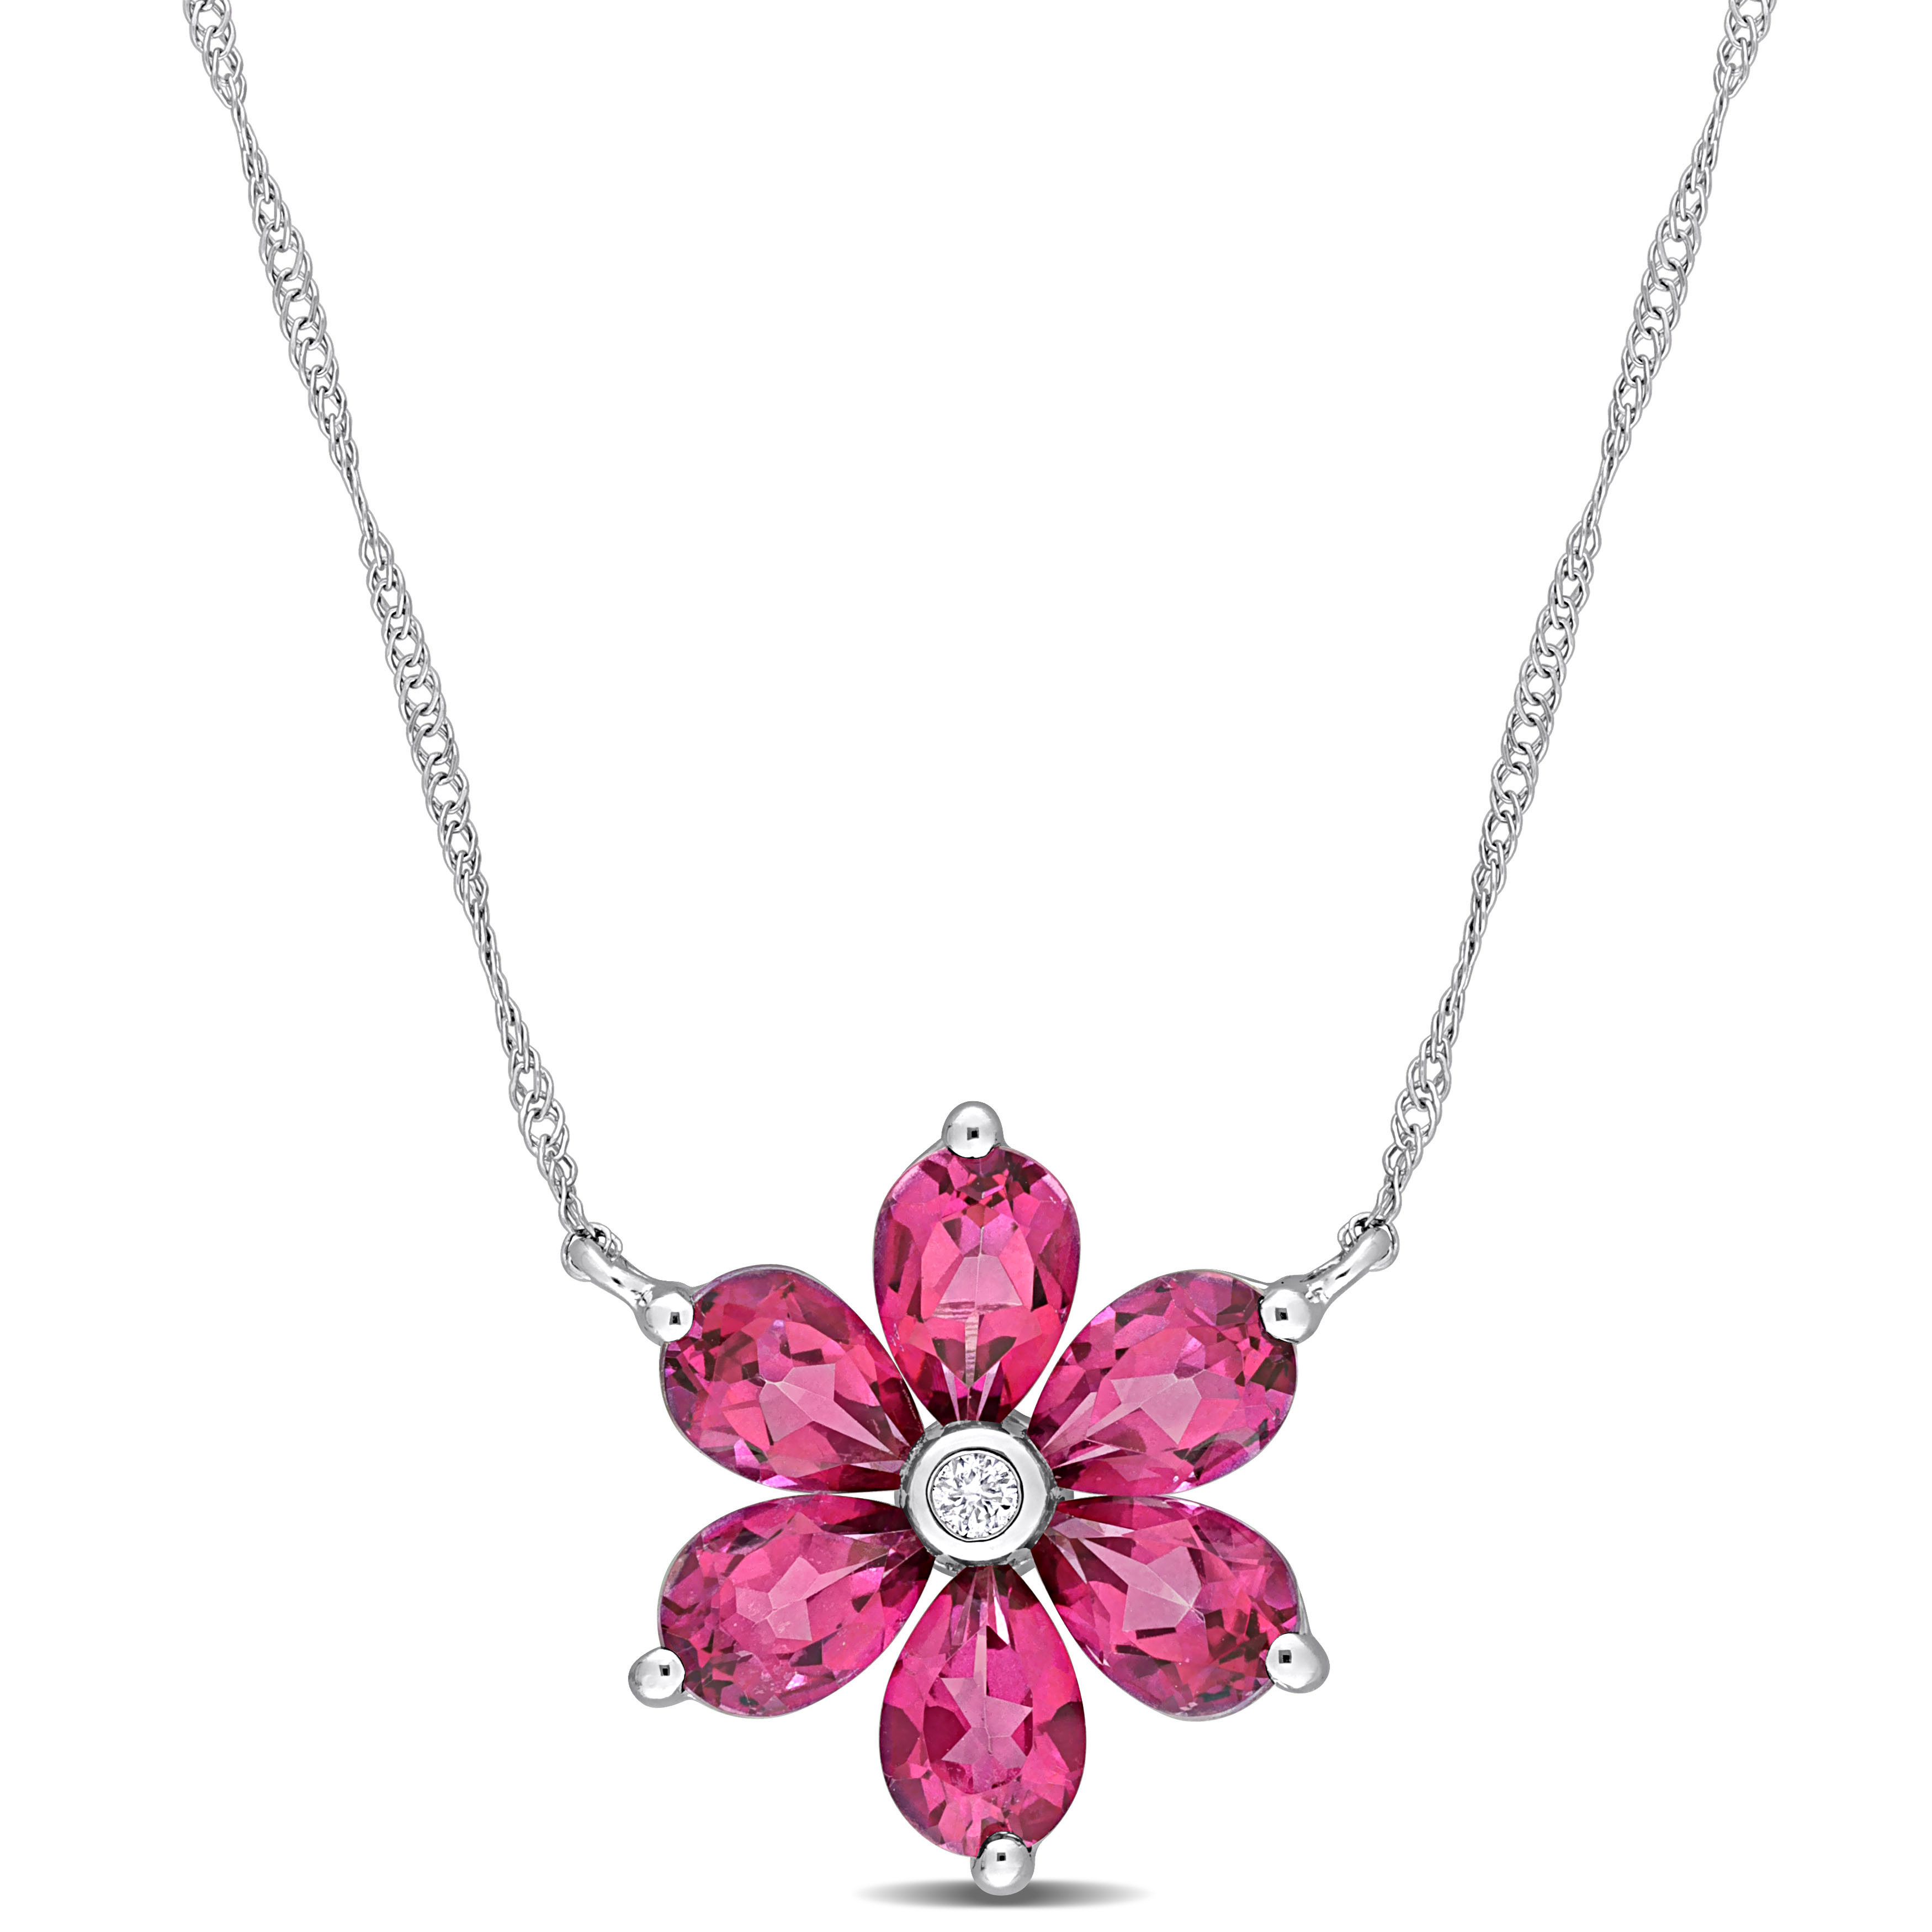 3 1/3 CT TGW Pear Shape Pink Topaz and Diamond Accent Floral Pendant with Chain in 10k White Gold